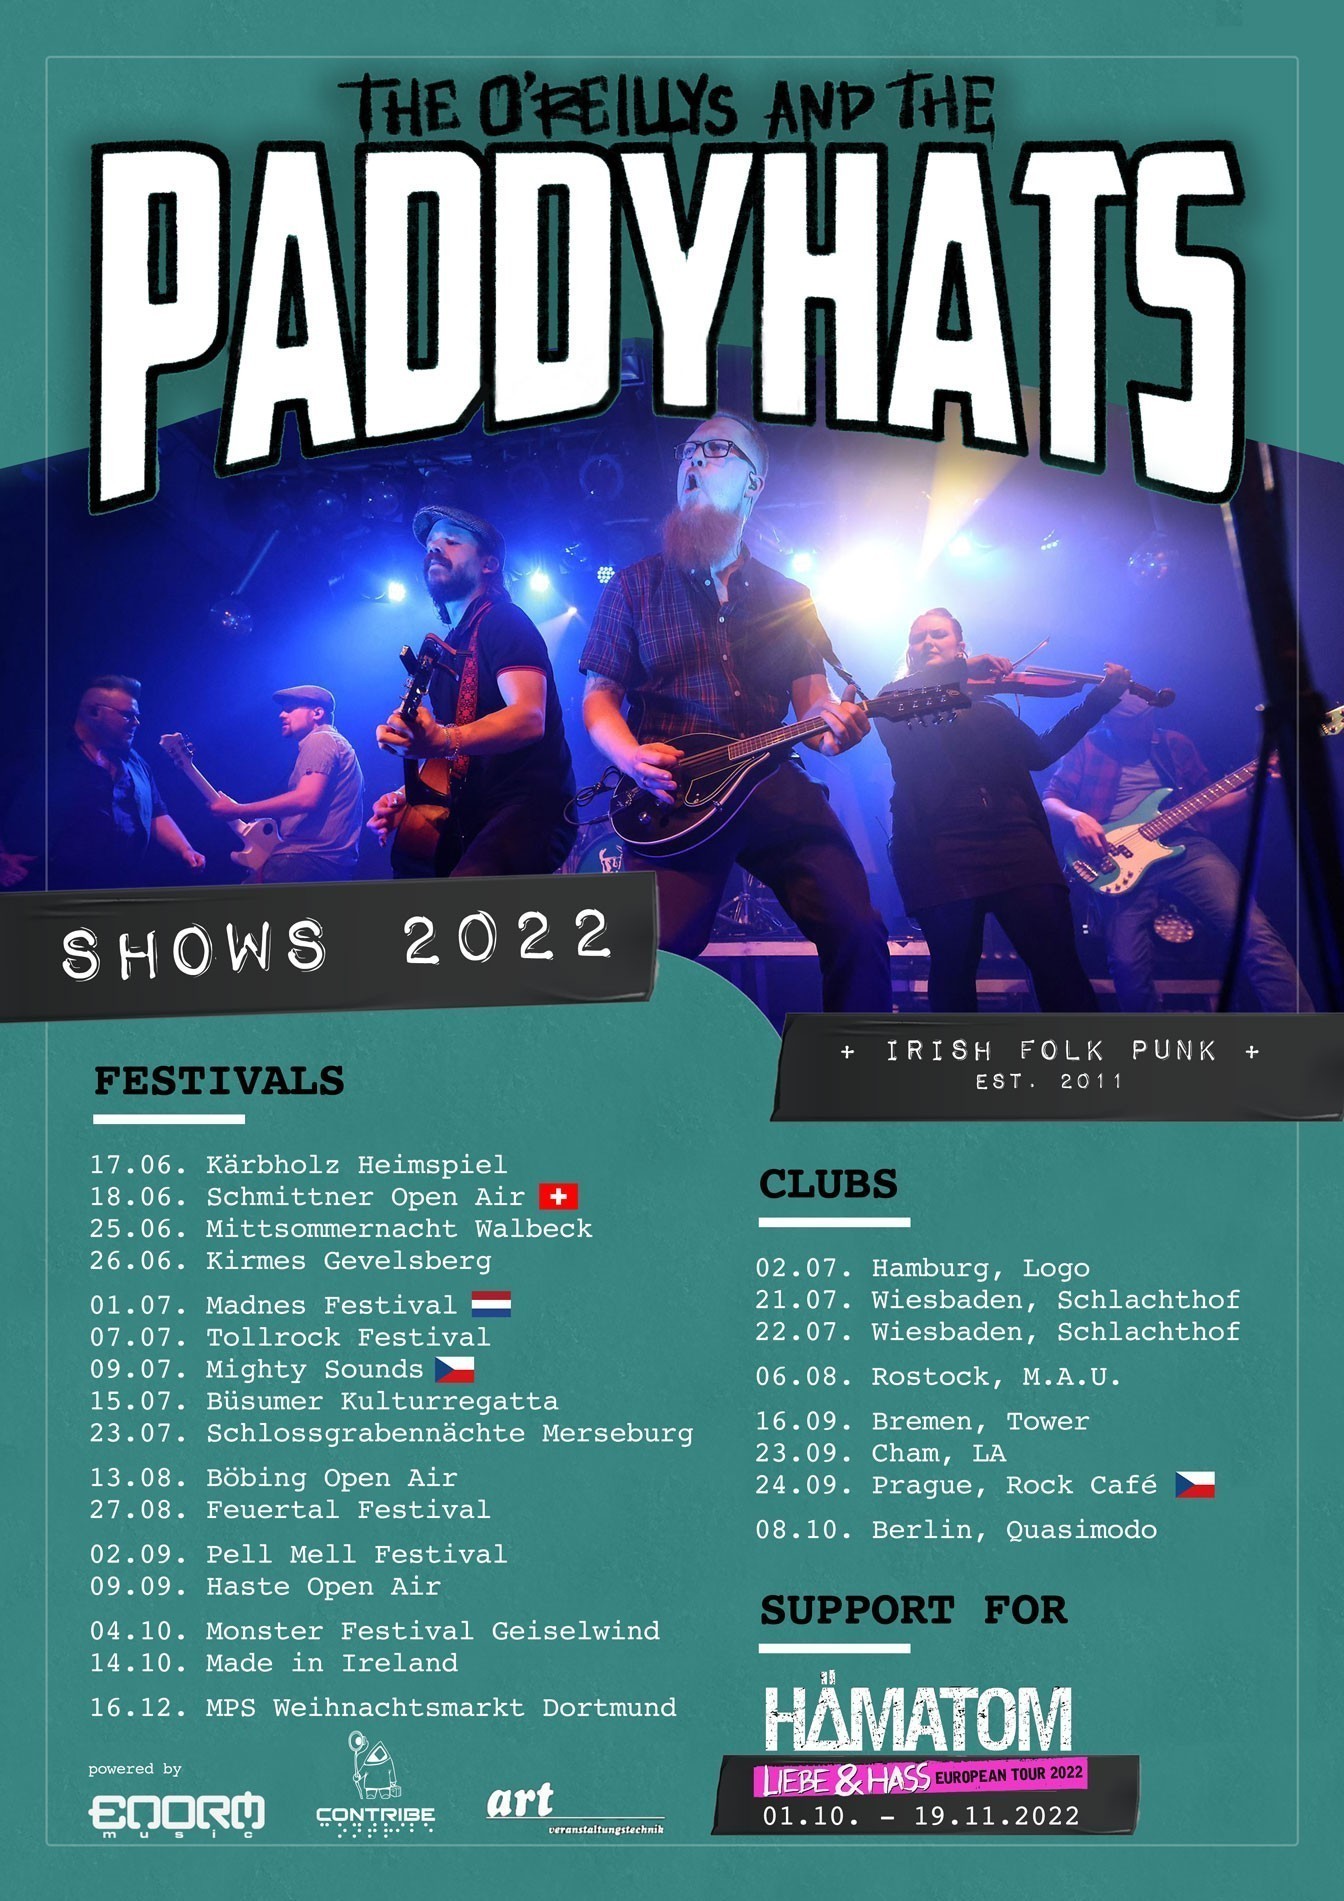 New shows confirmed – Get your tickets now